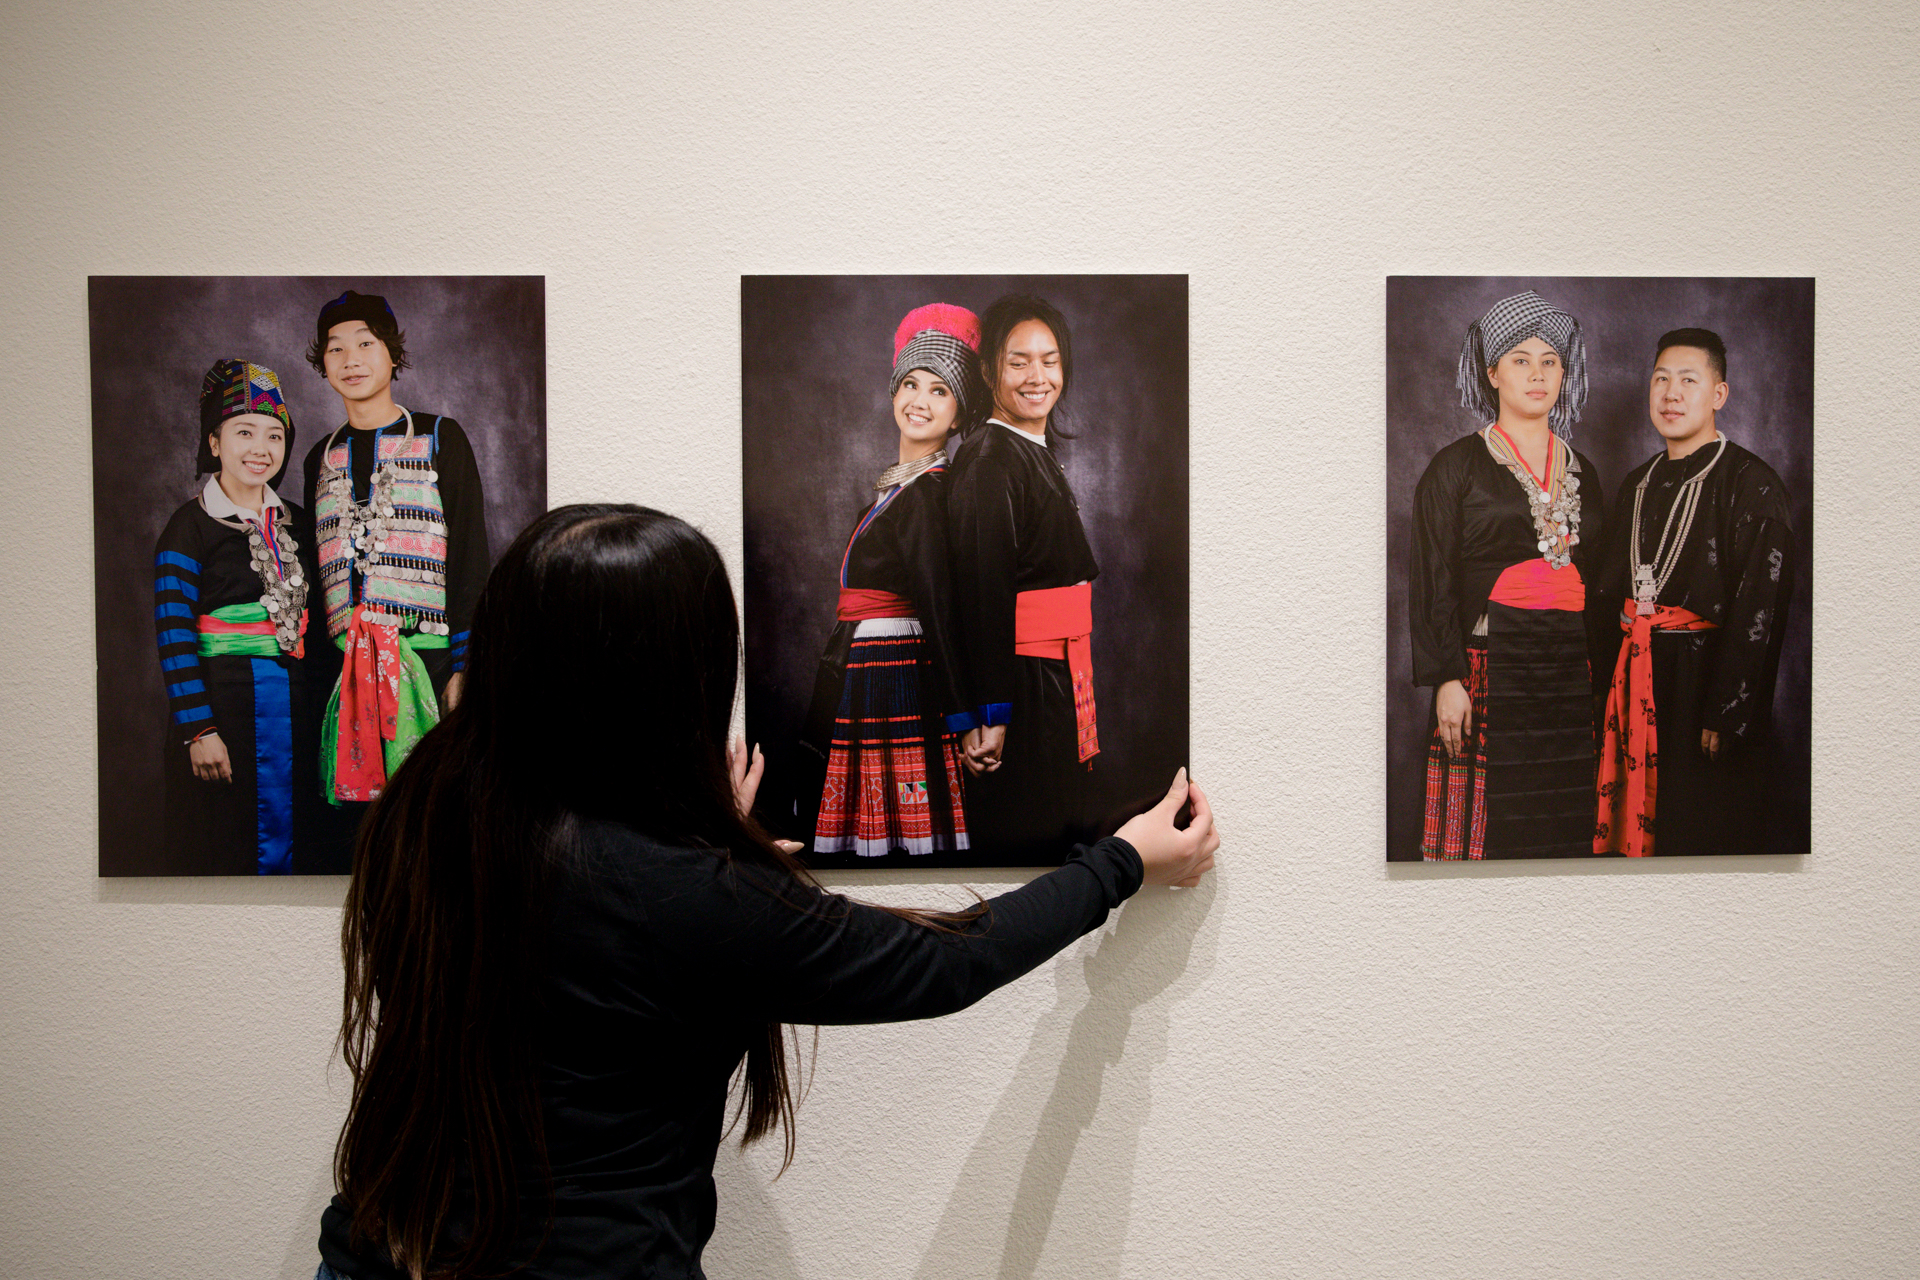 A woman adjusts prints on a wall of men and women modeling traditional Hmong attires, on display as part of an exhibit at Sac State.